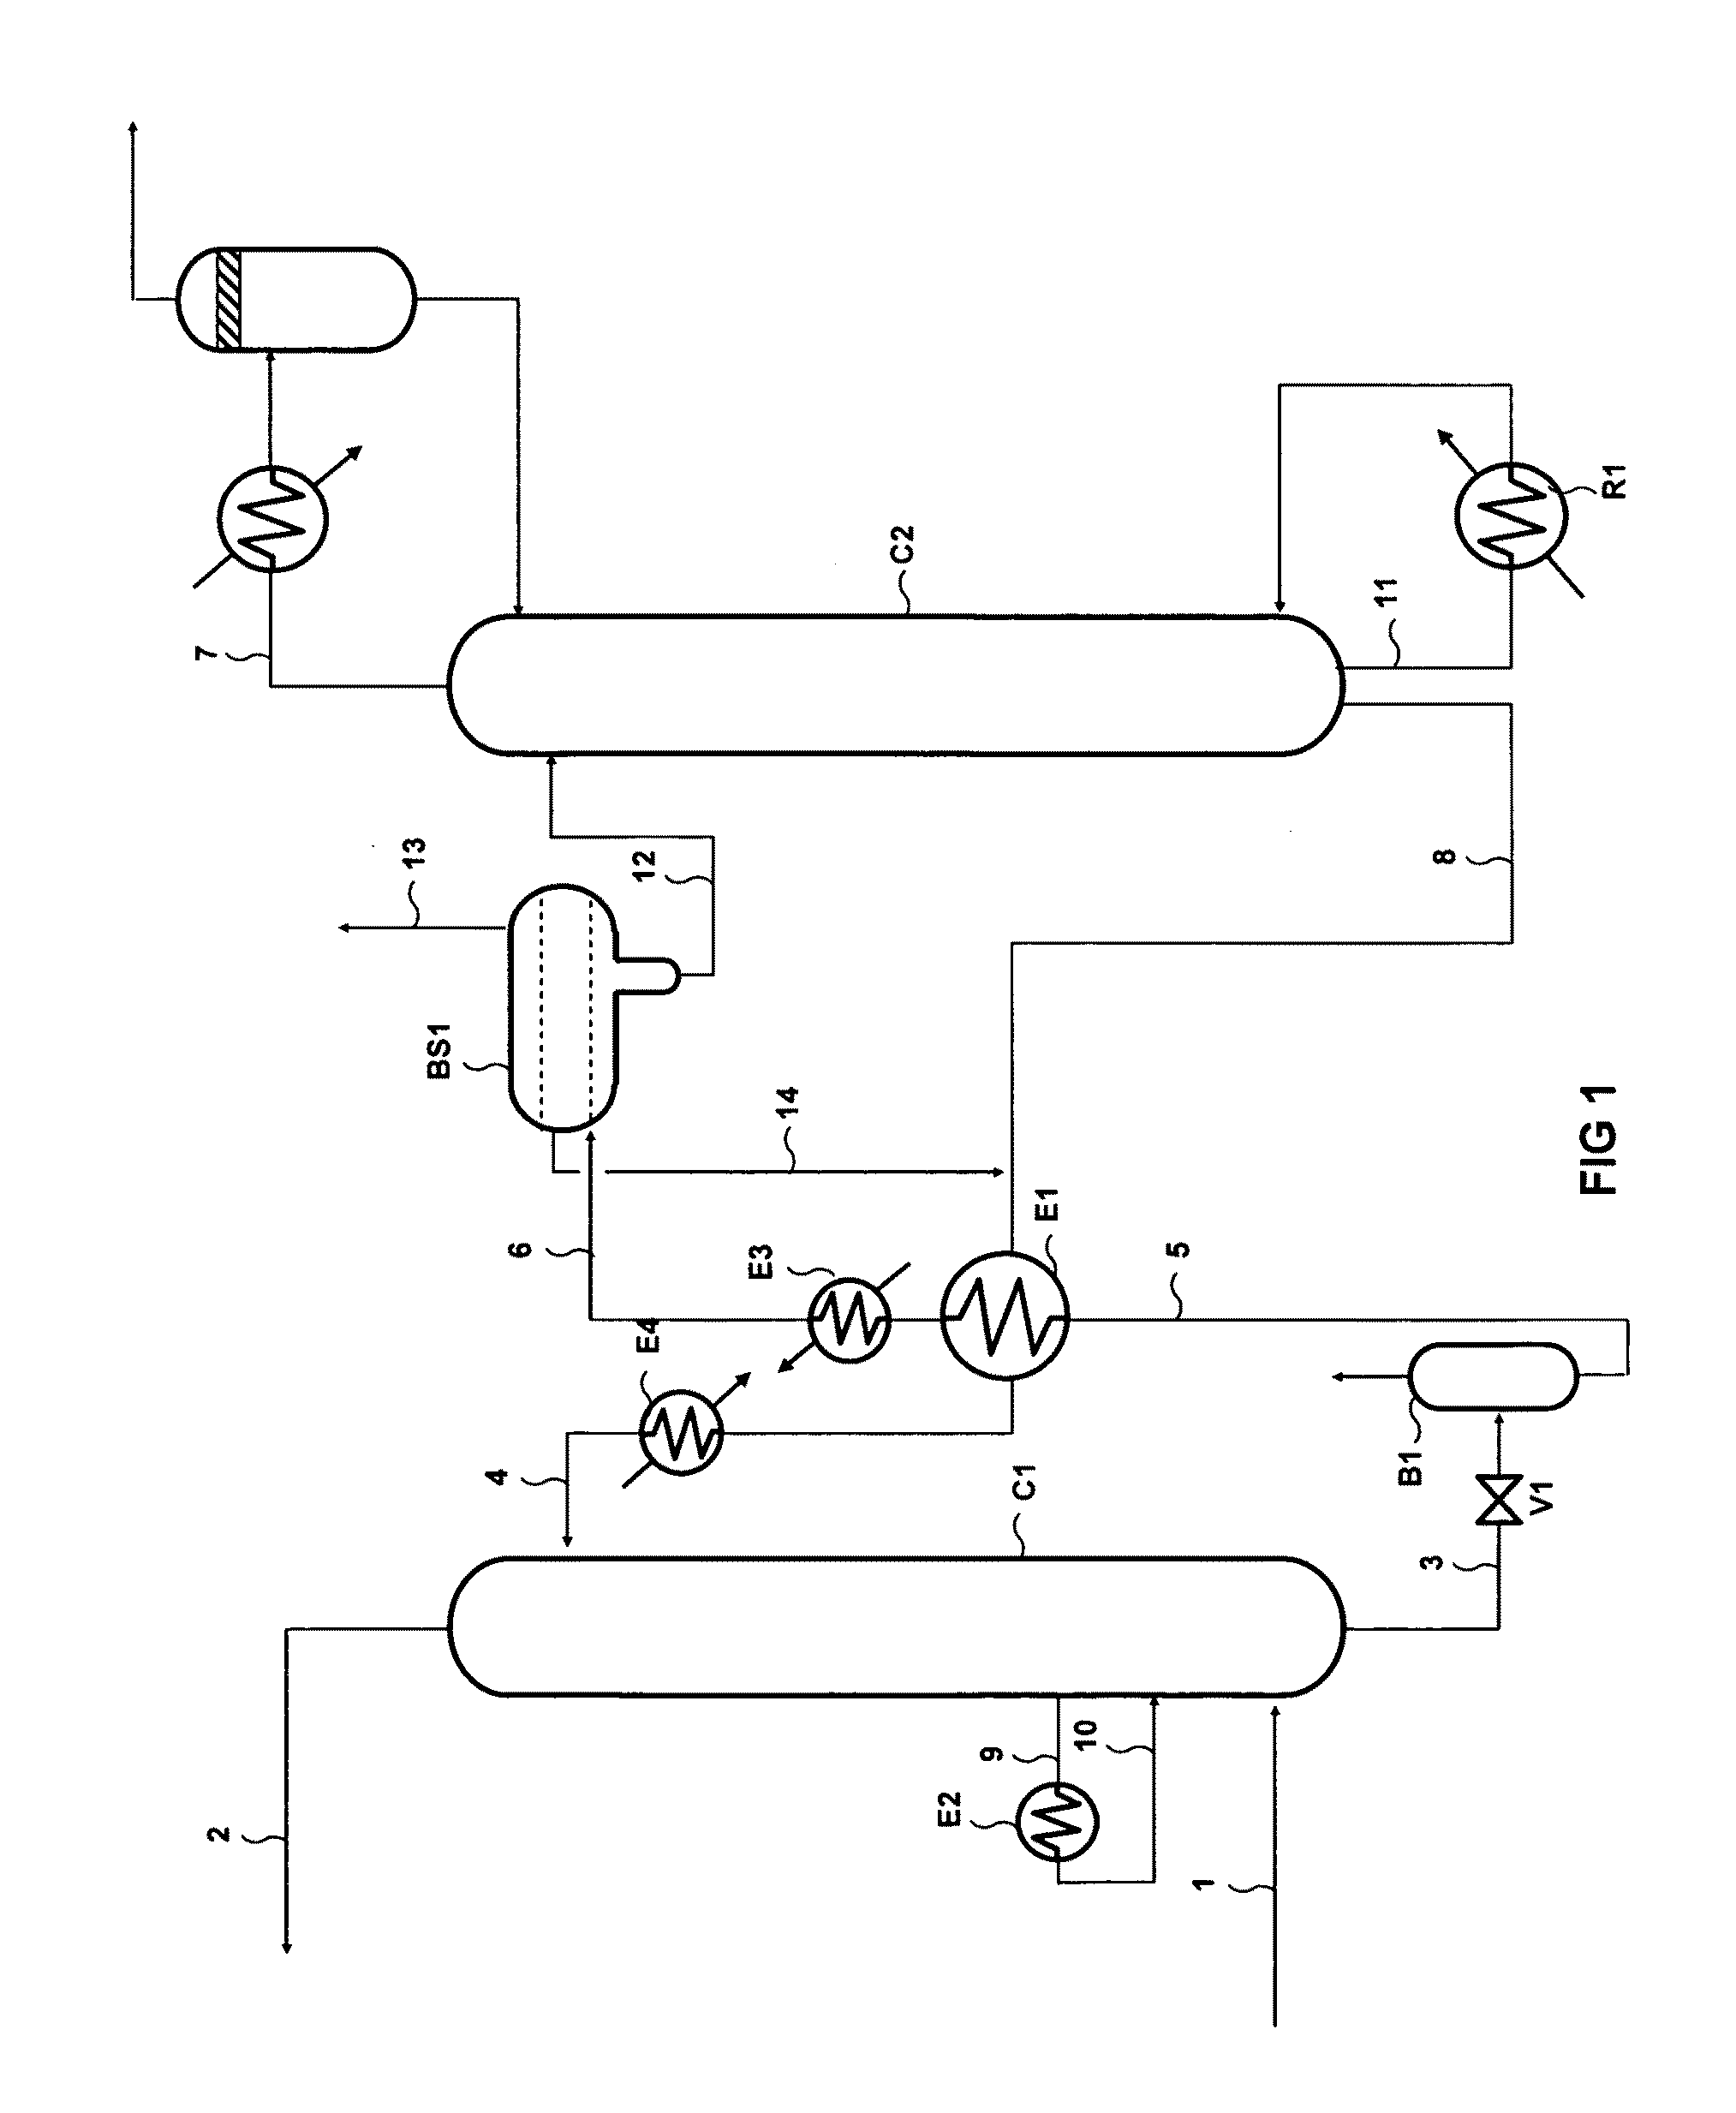 Gas deacidizing method using an absorbent solution with demixing control